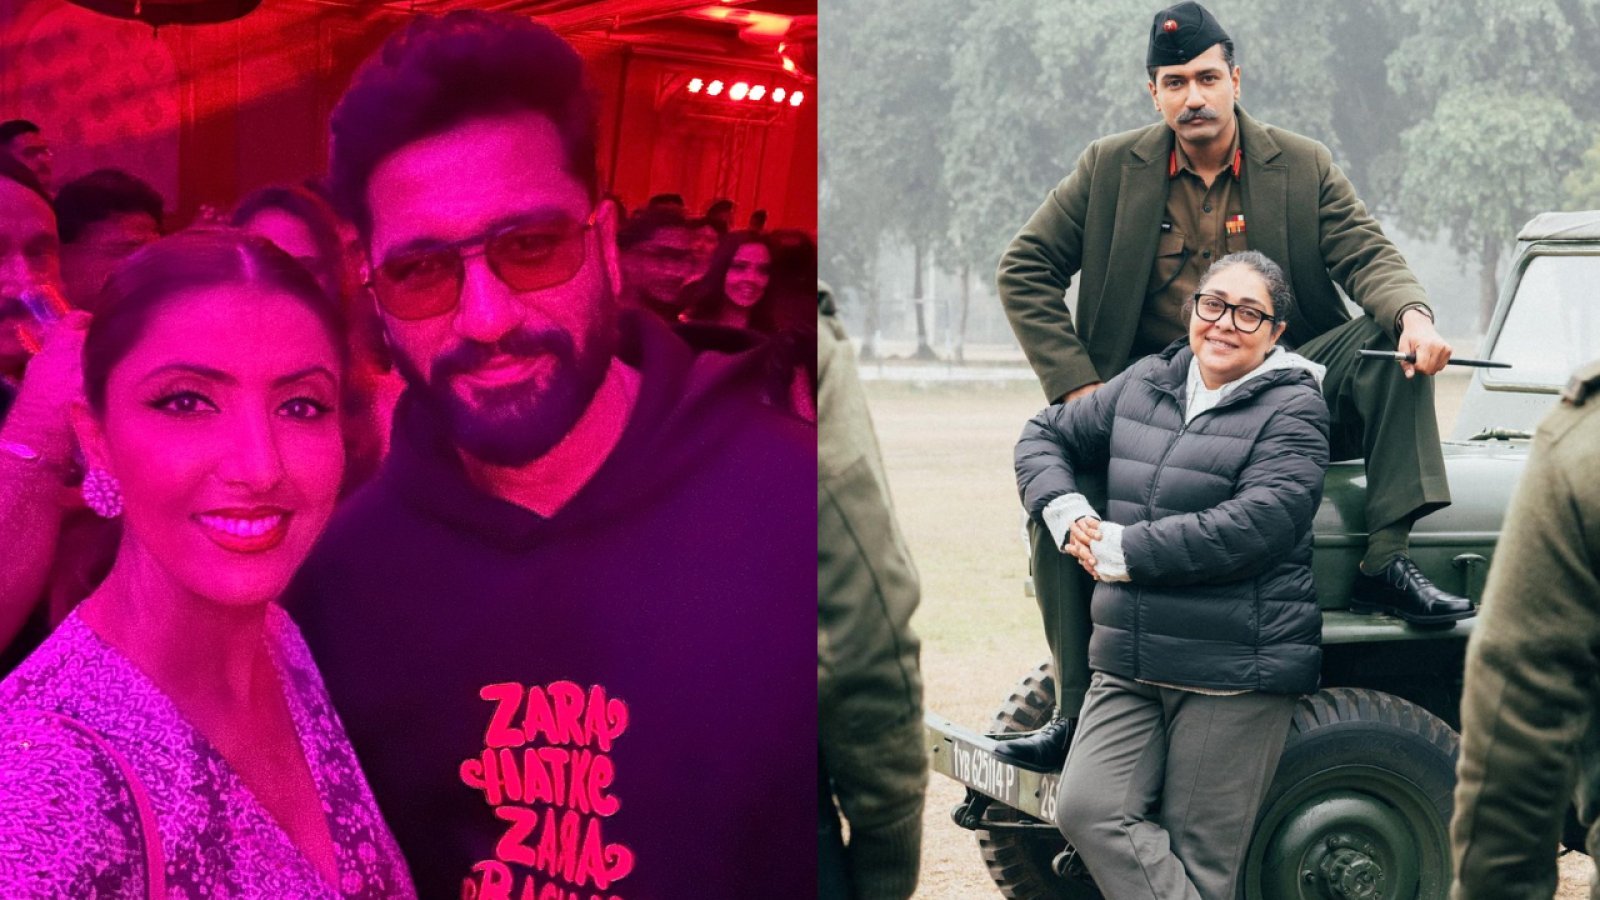 Jyoti Saxena Post watching Sam Bahadur, couldn't stop praising director Meghna Gulzar and Vicky Kaushal for their phenomenal contributions to the industry through Sam Bahadur